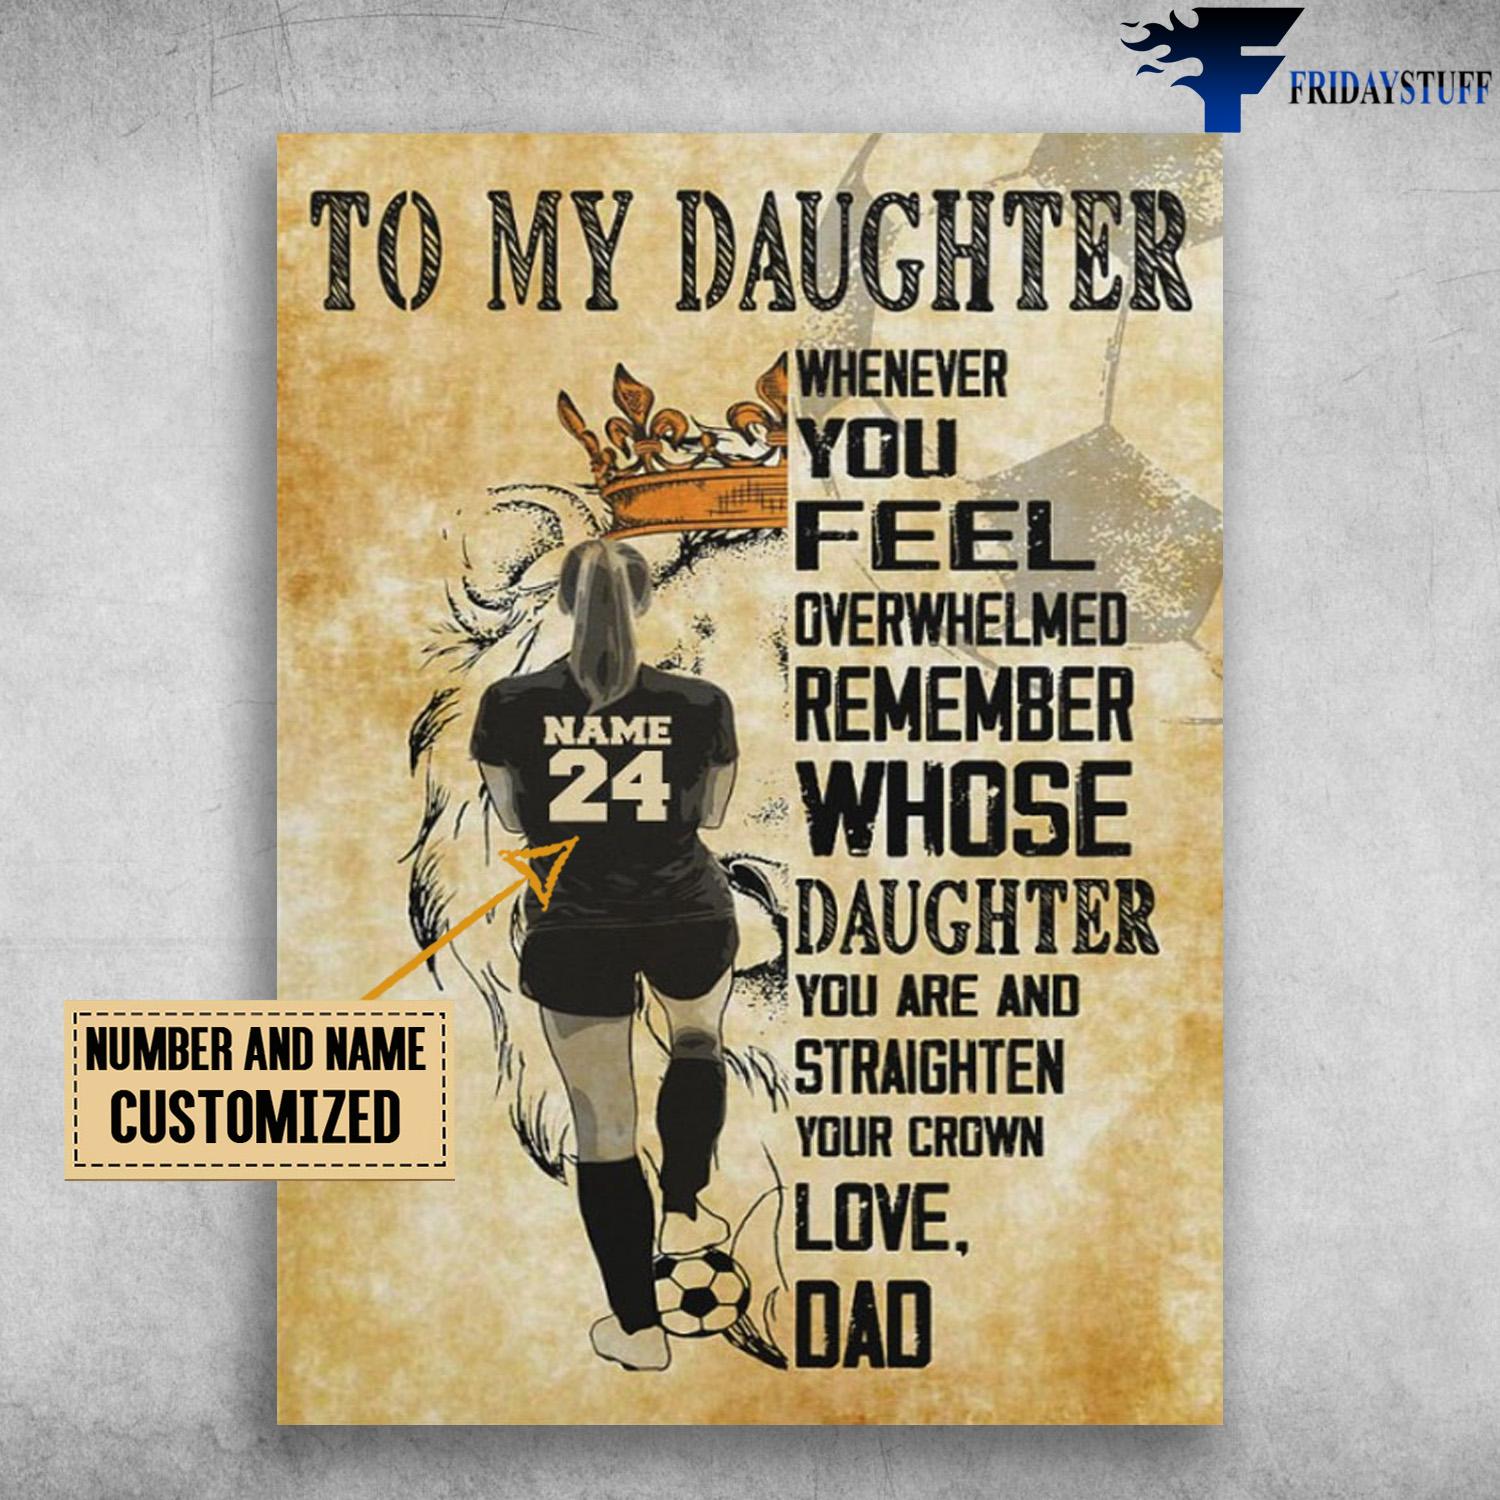 Soccer Daughter, Dad And Daughter, Whenever You Feel Overwhelmed, Remember Whose Daughter, You Are And Straighten Your Crown